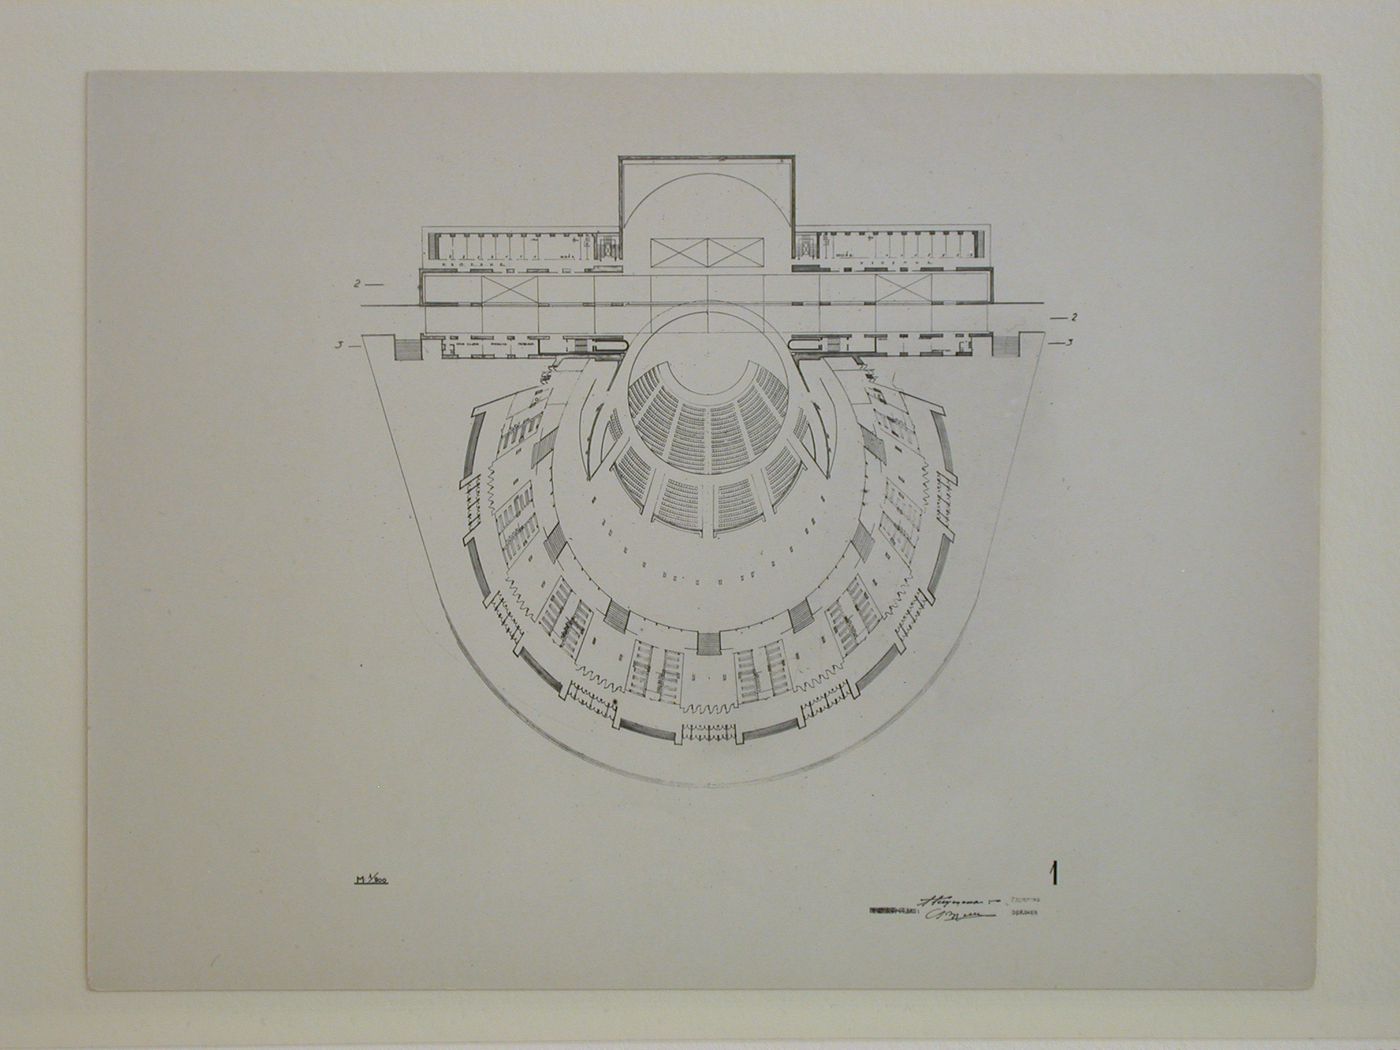 Photograph of a plan for a Red Army Theater, Moscow